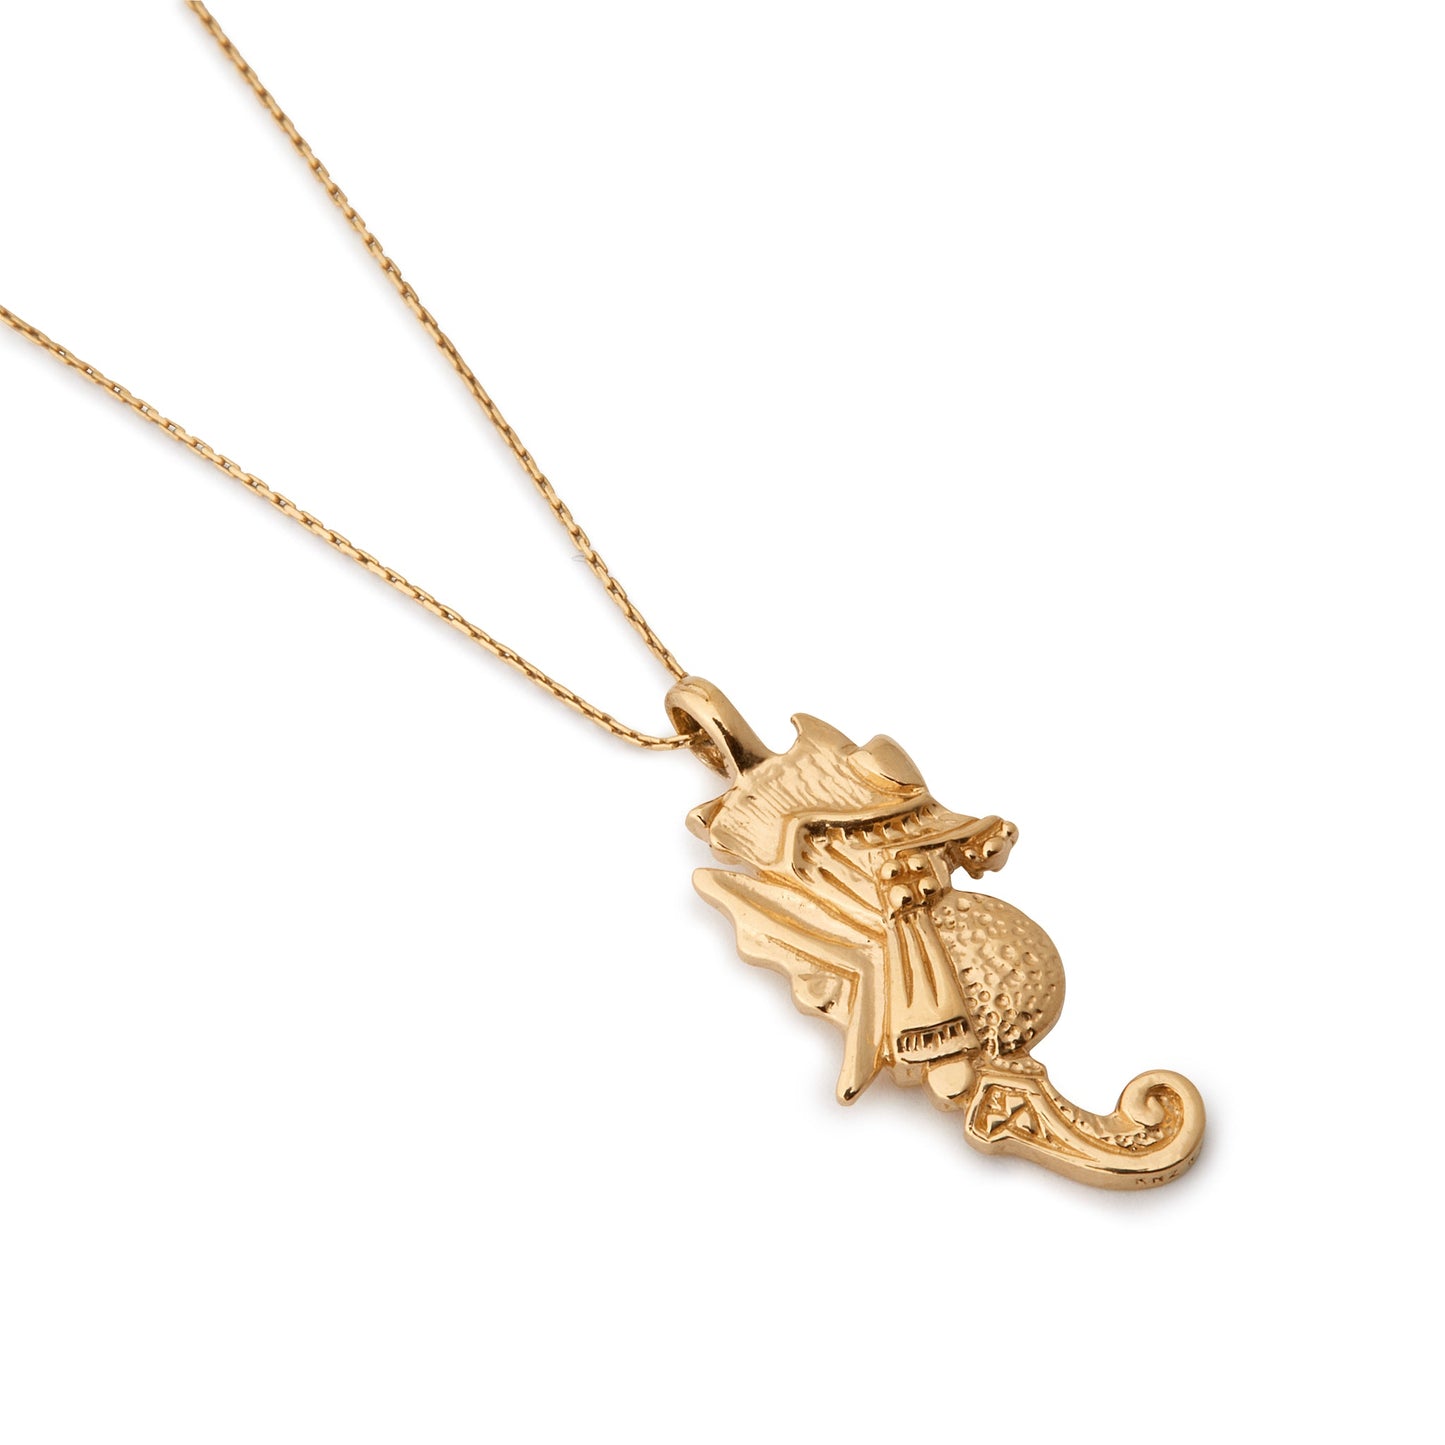 Seahorse Necklace - Gold Plated Silver